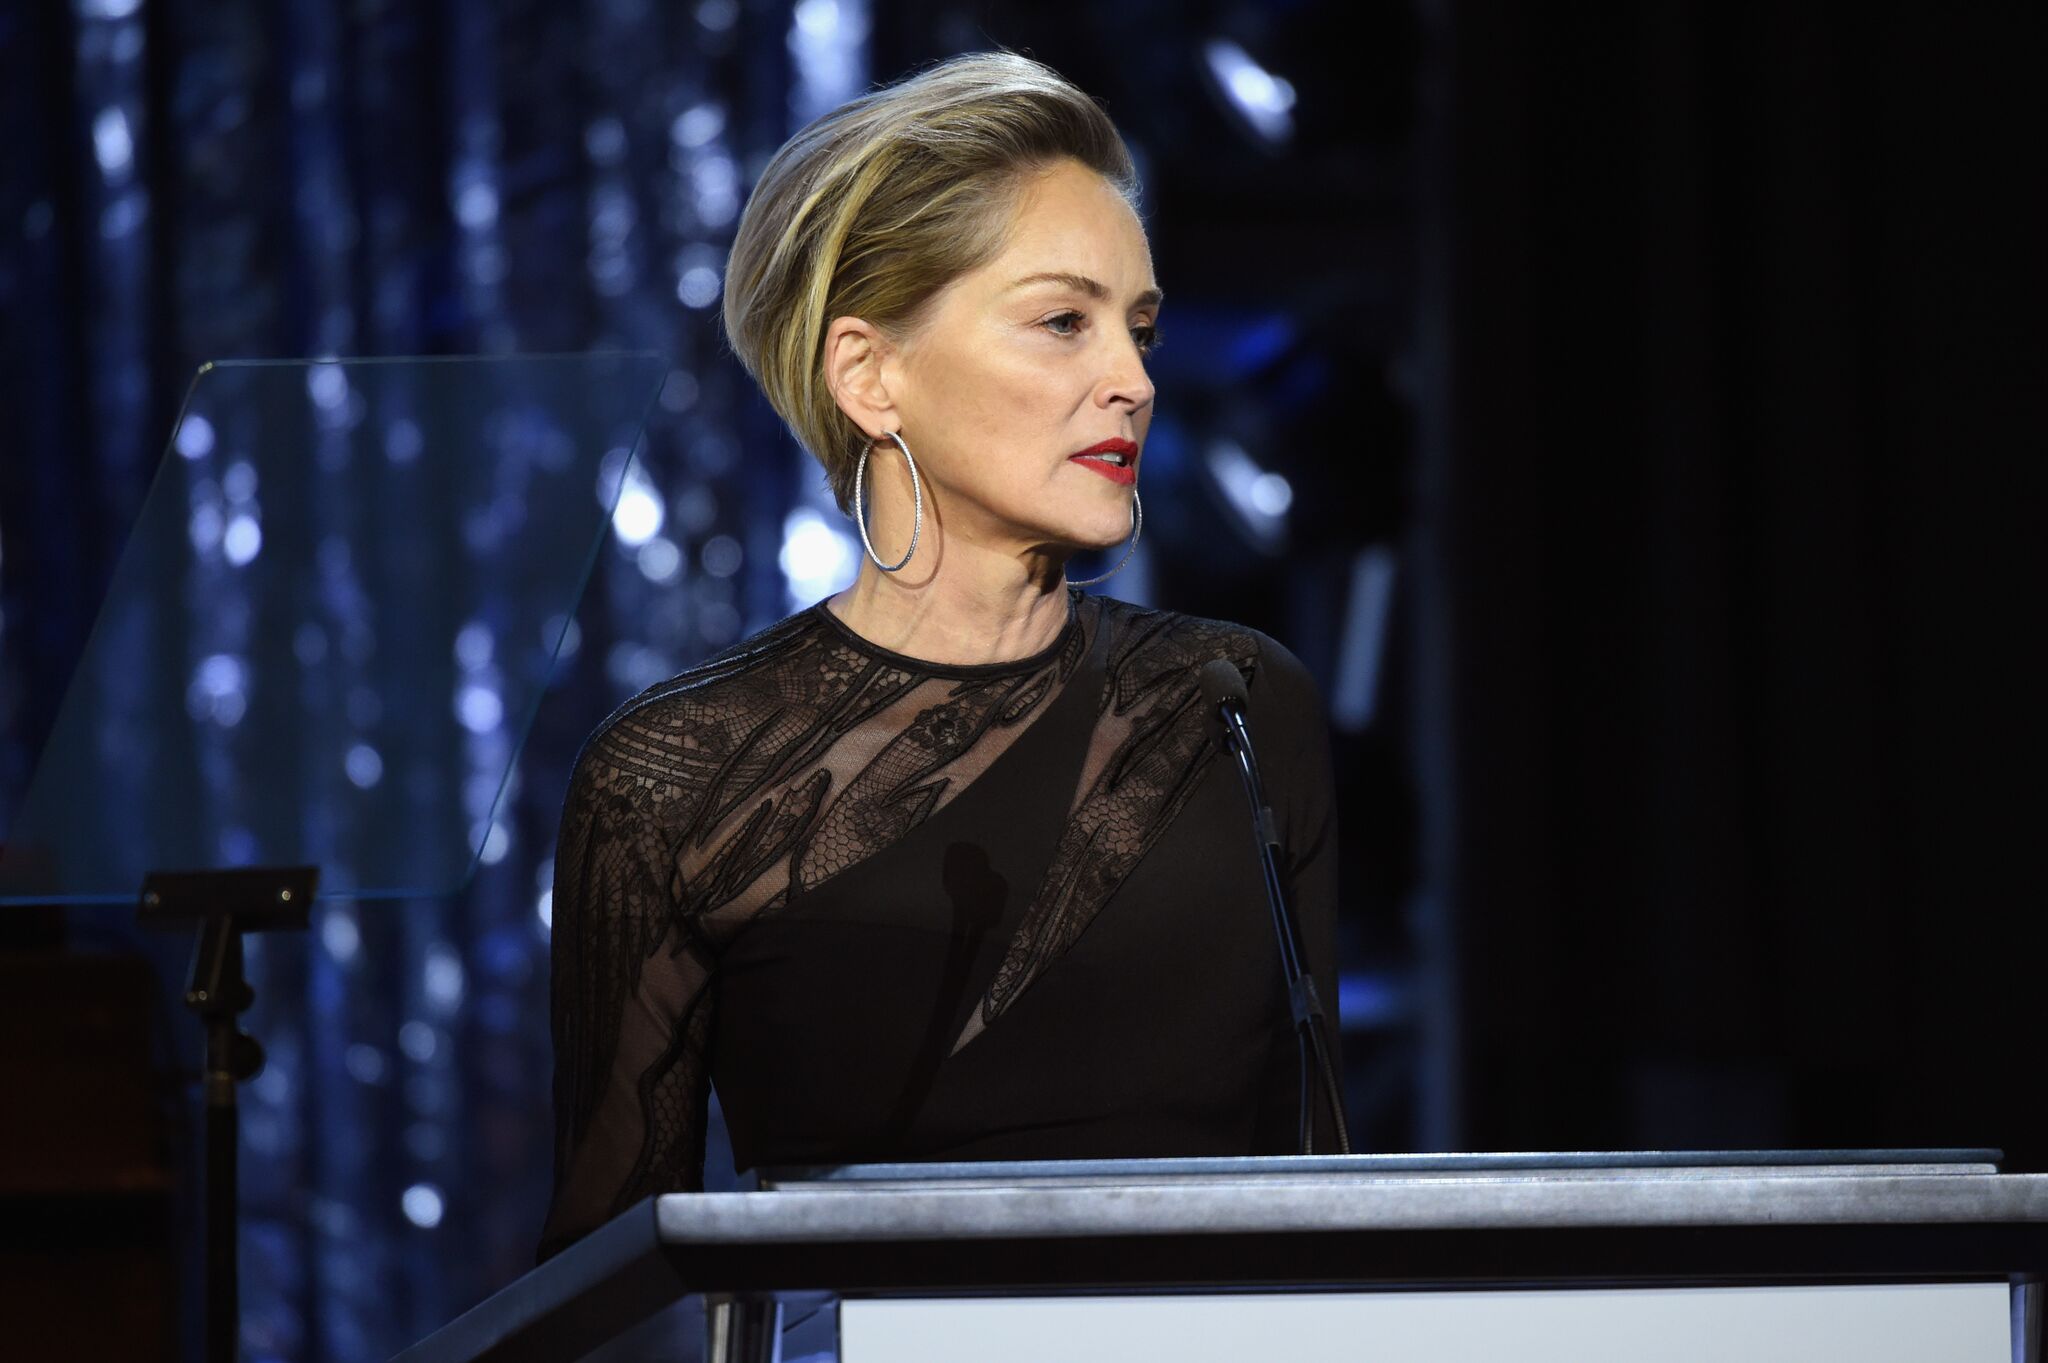 Sharon Stone speaks onstage the 25th Annual Elton John AIDS Foundation's Academy Awards Viewing Party  | Getty Images